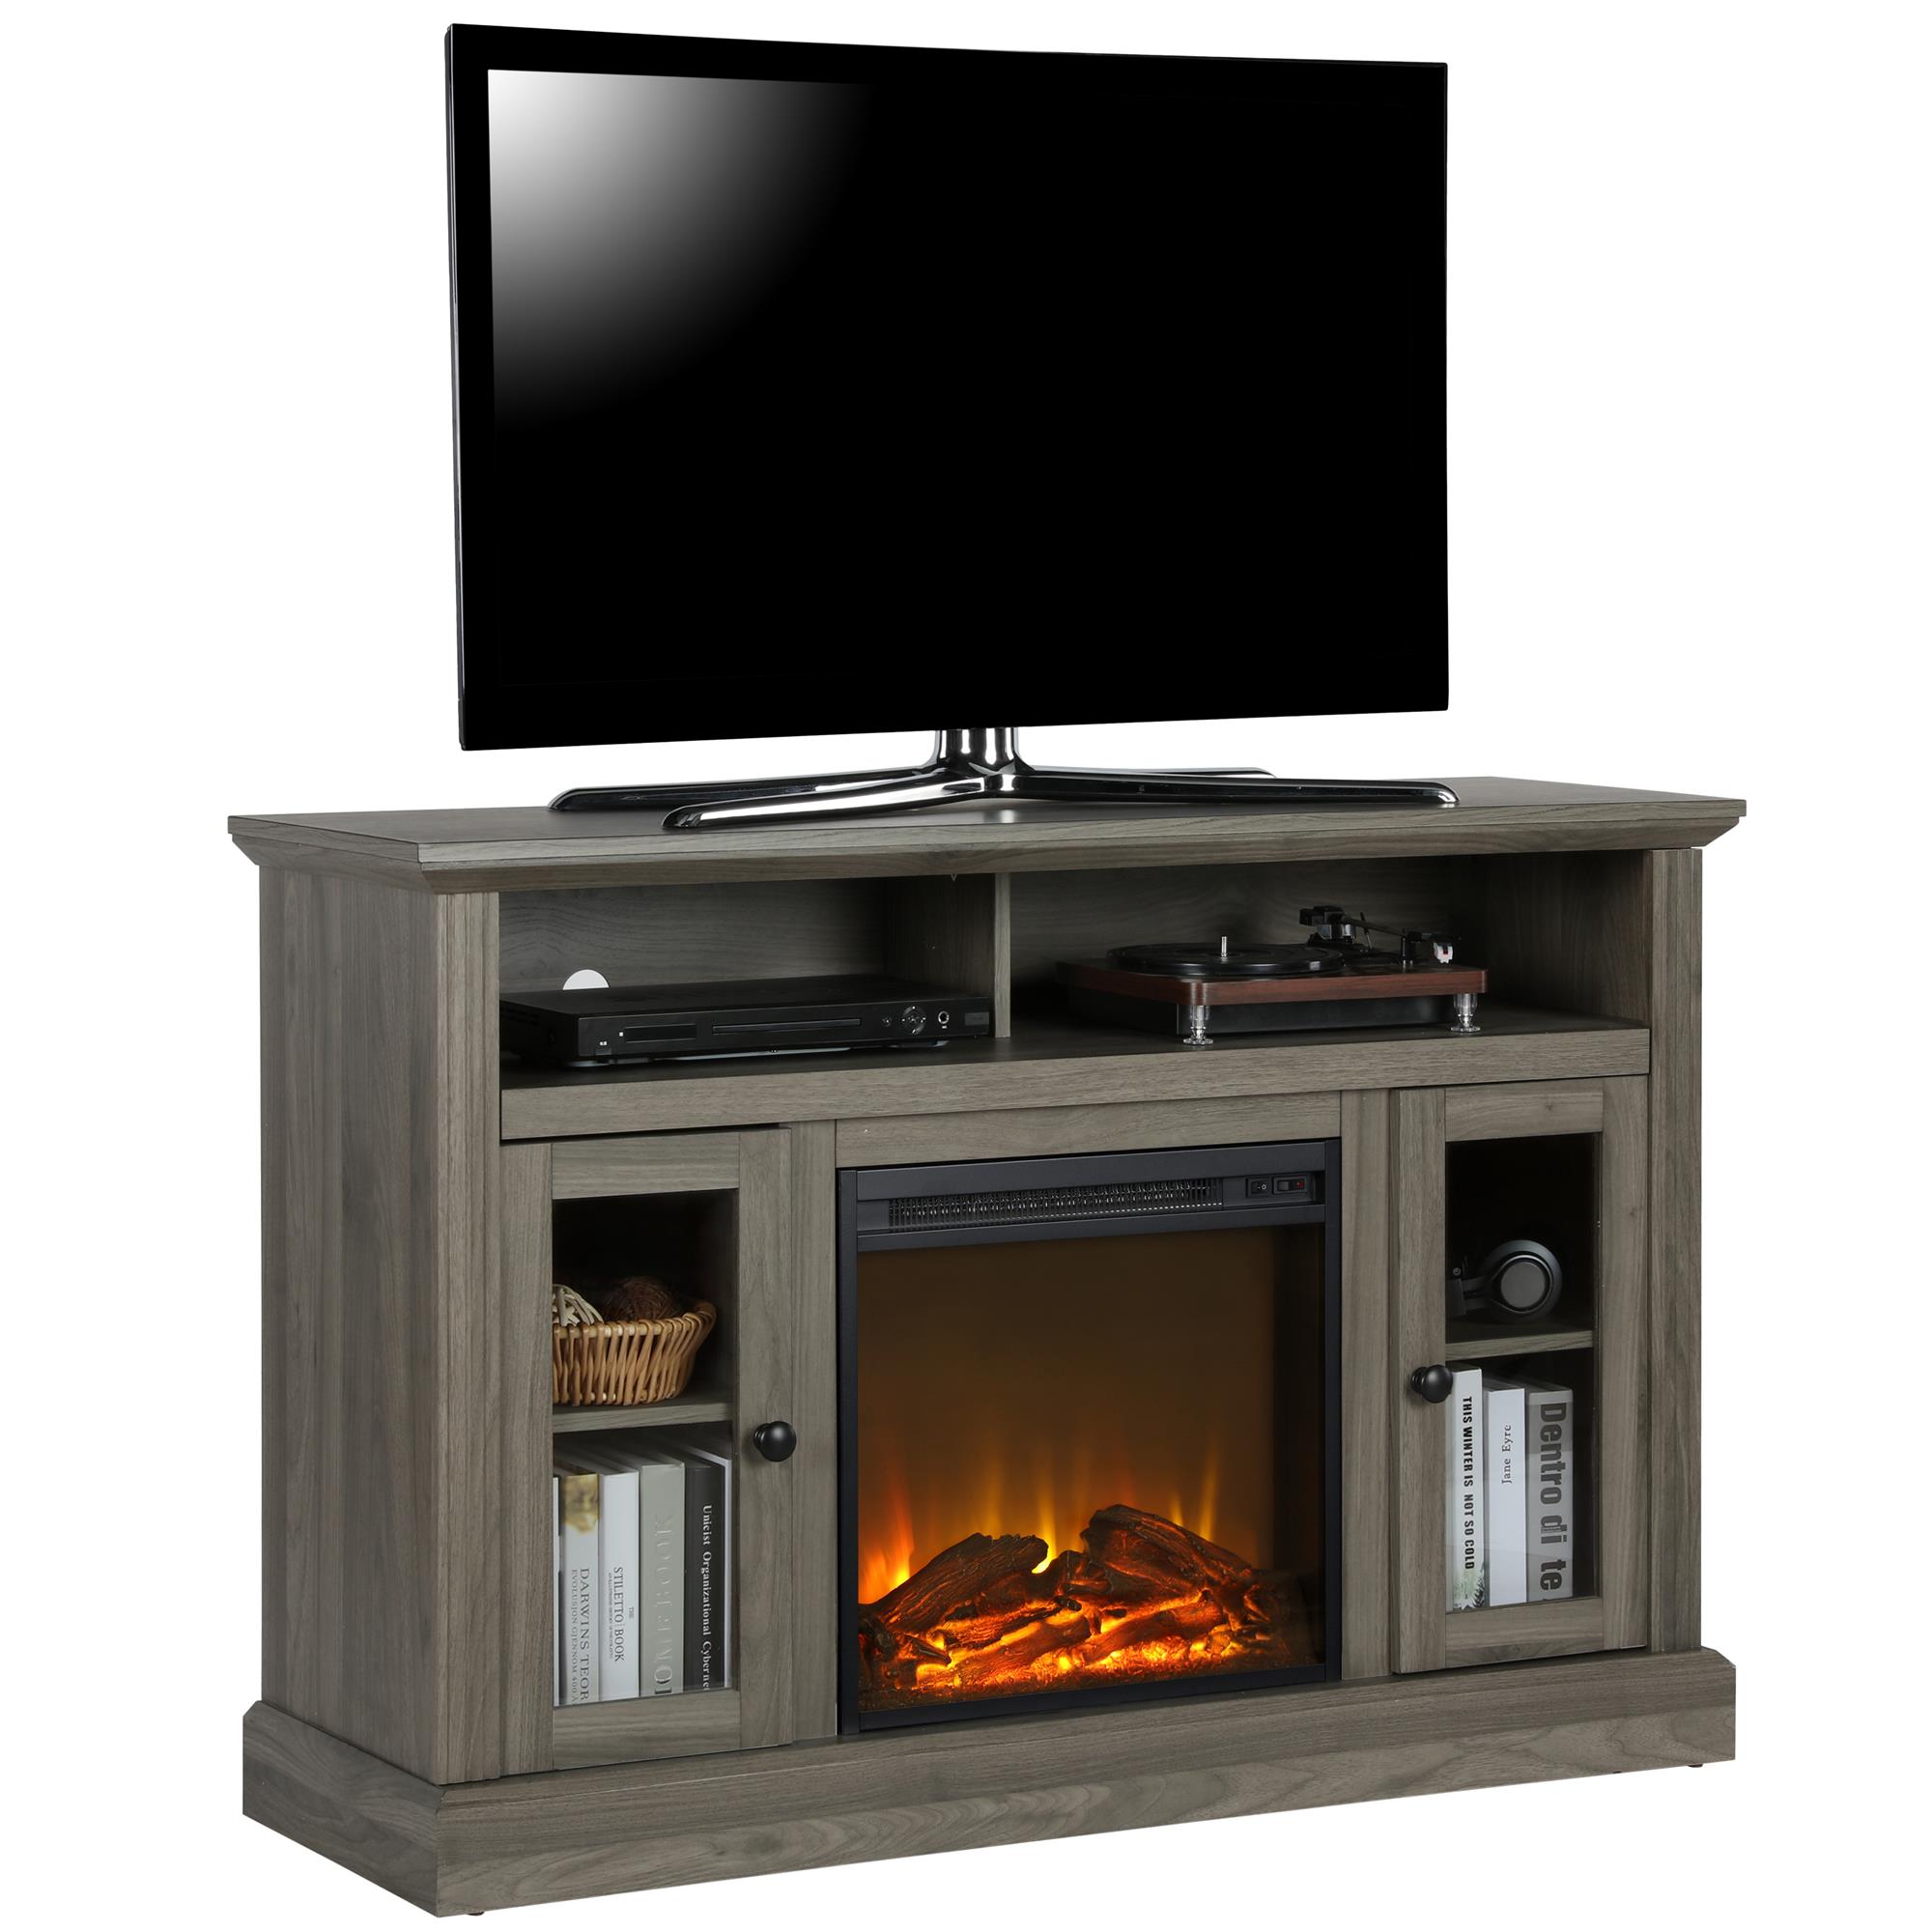 Best Electric Fireplace TV Stand 2020: Top 20 Expert Reviews